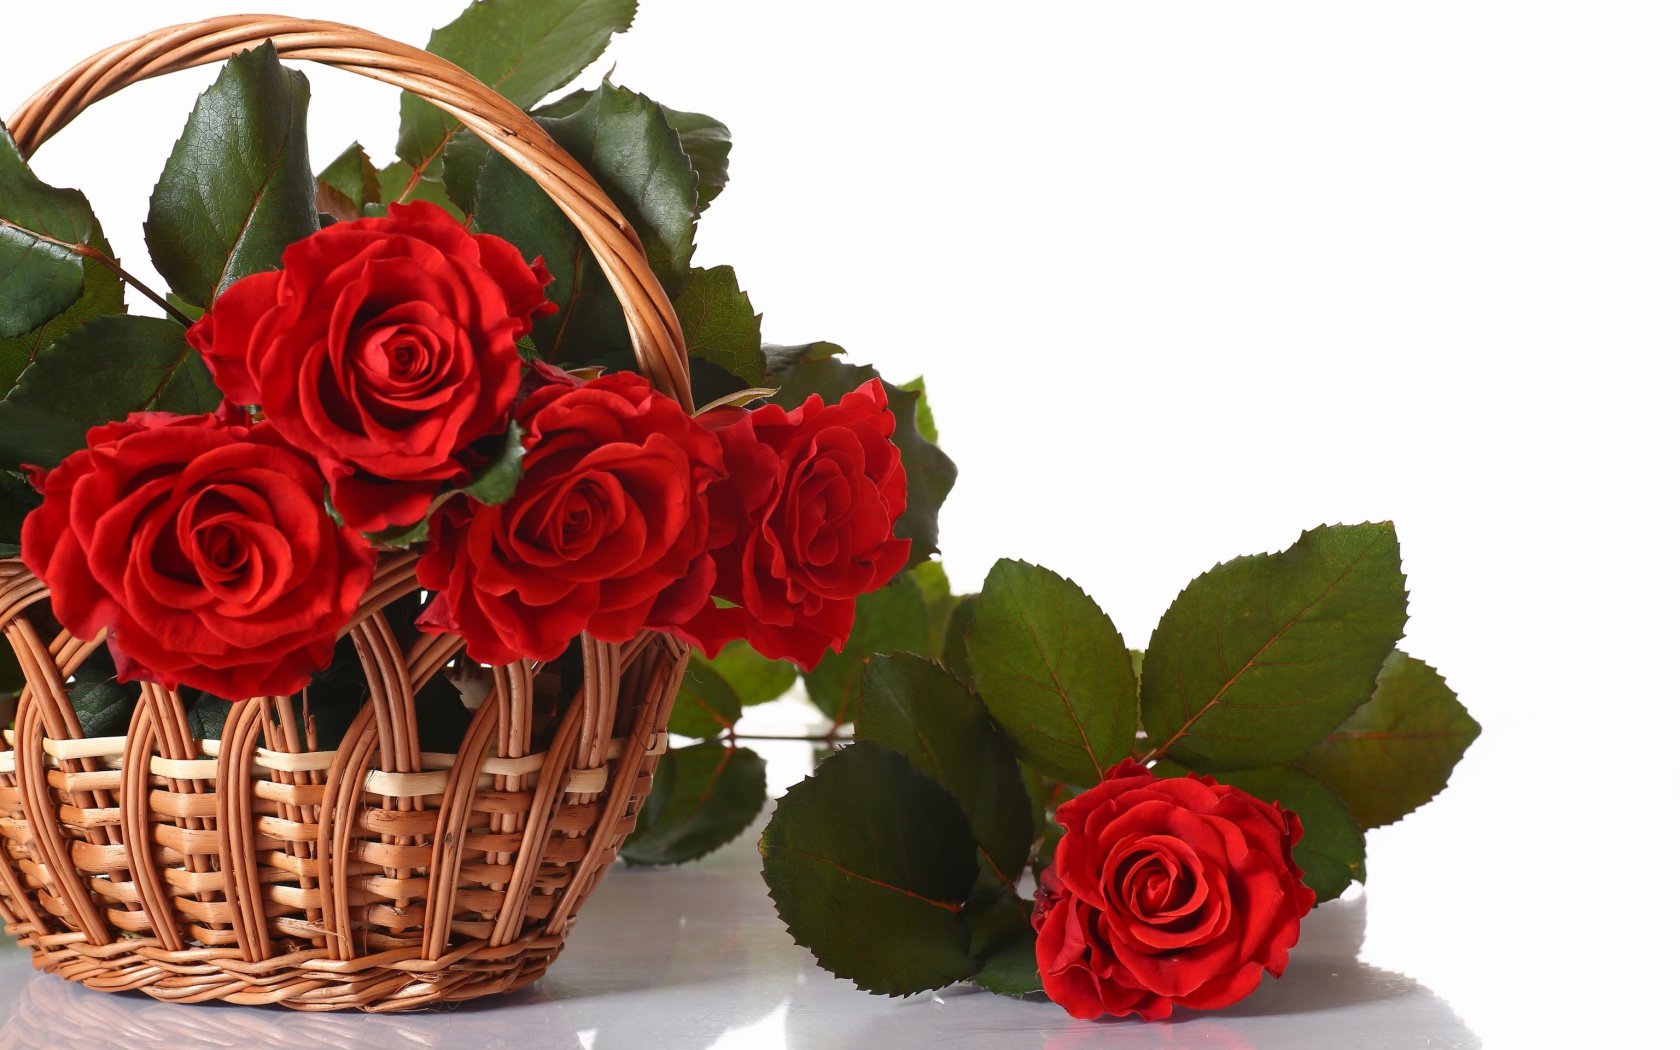 Basket with Roses wallpaper 1680x1050